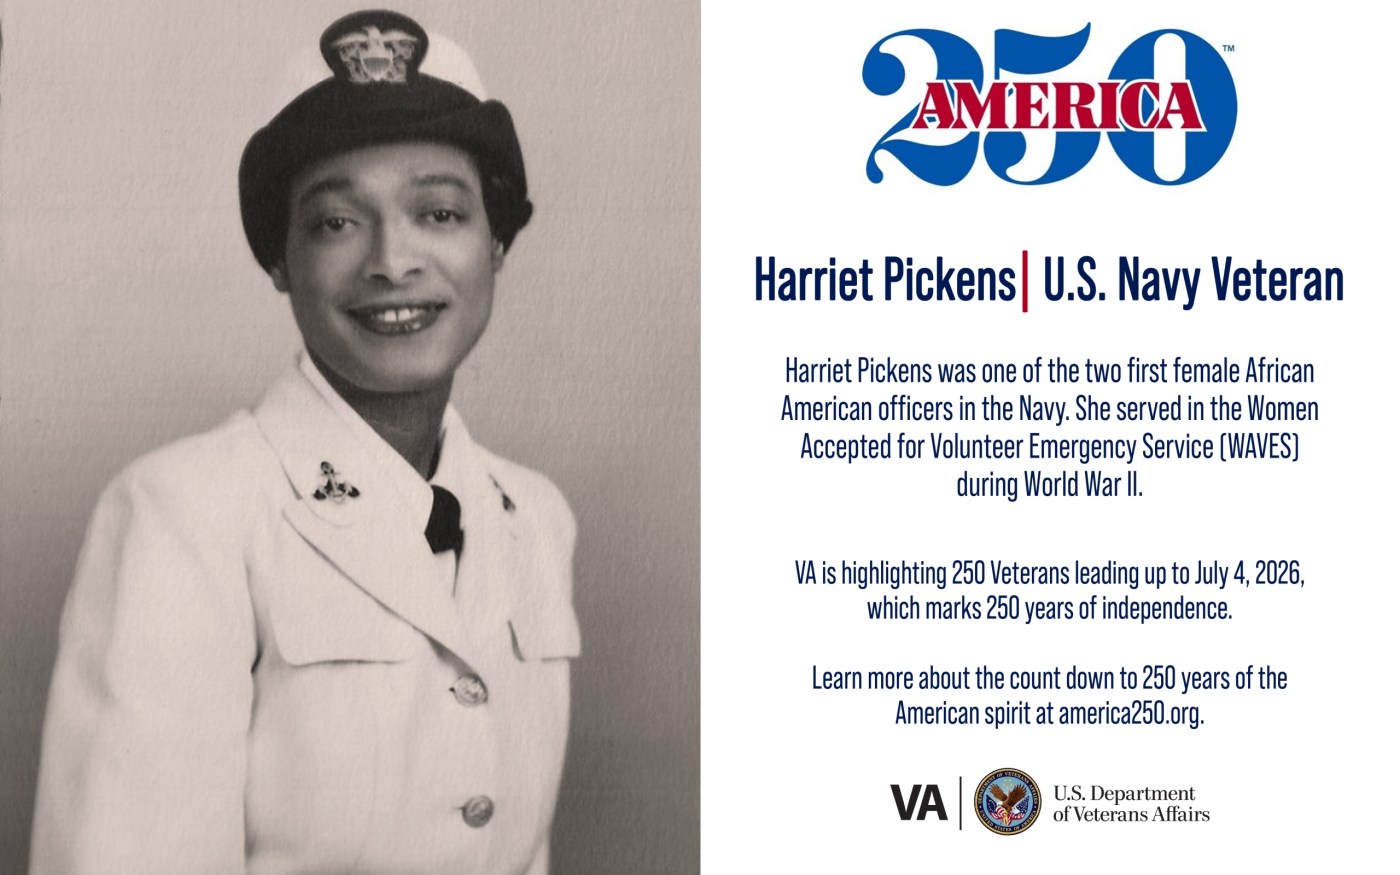 This week’s America250 salute is Navy Veteran Harriet Pickens, who was one of the first African American women to become a Navy officer.